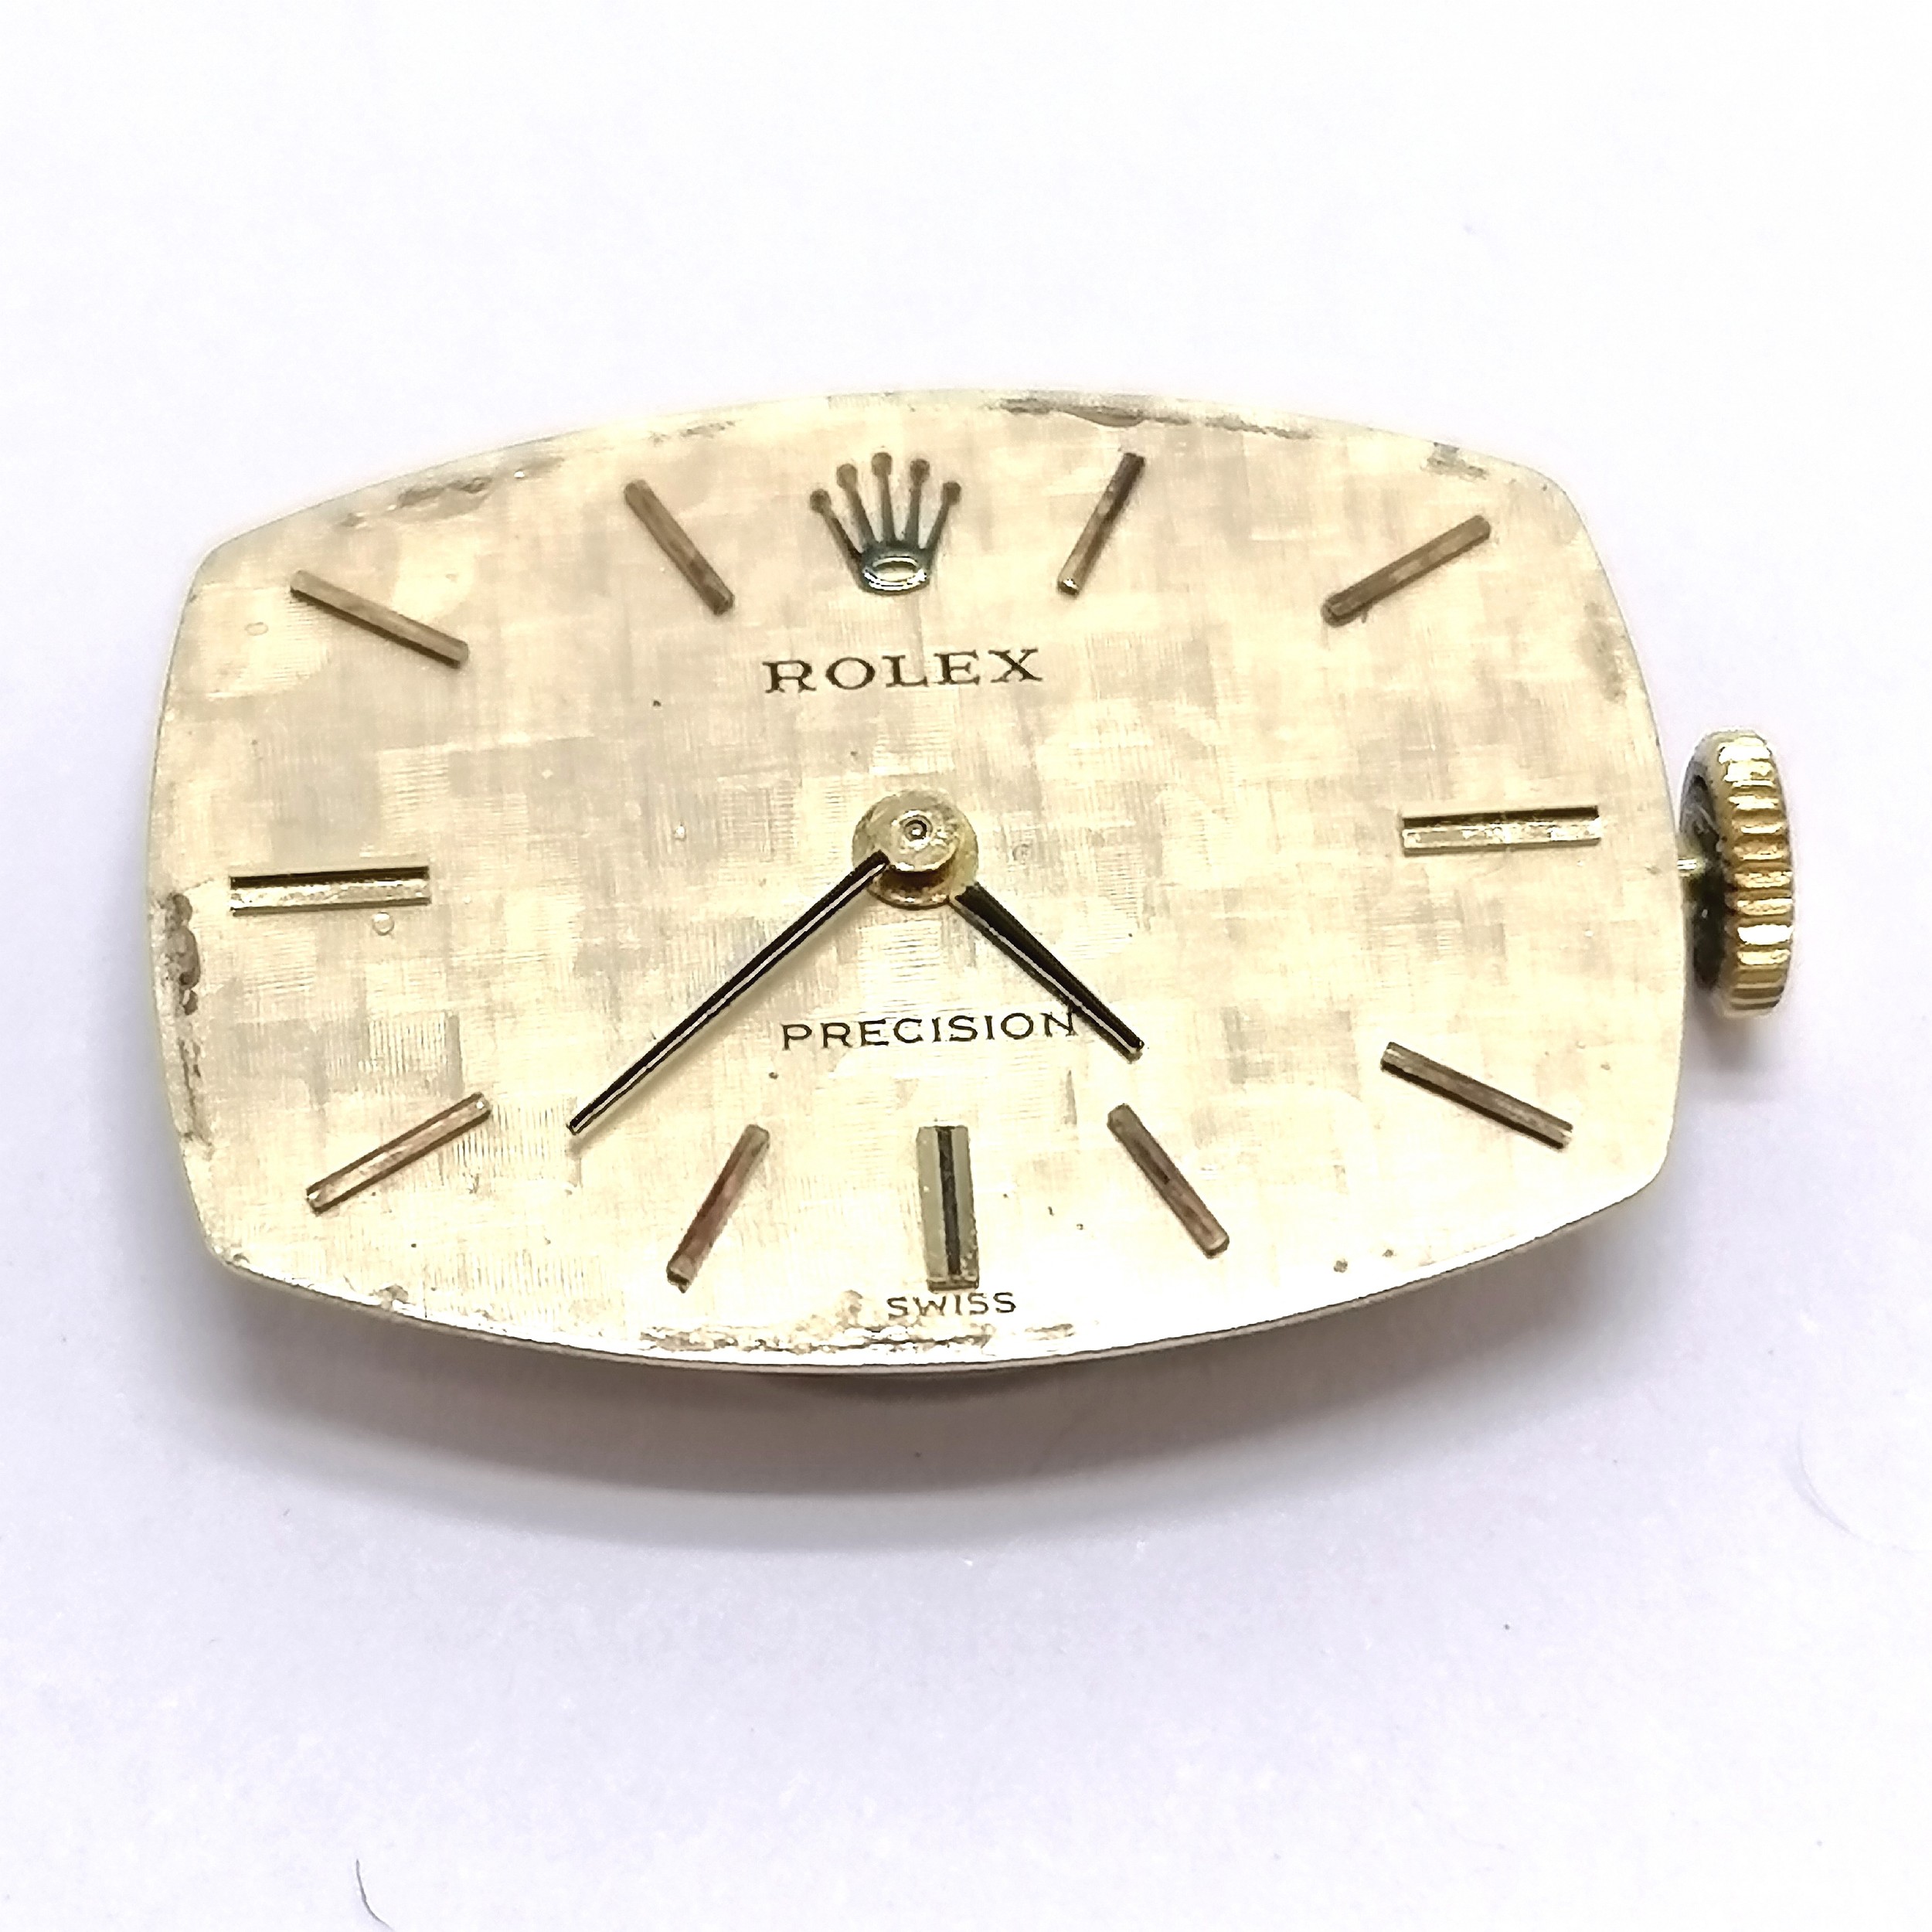 Rolex precision manual wind wristwatch movement #1400 (dial 21mm across) & running - for spares /